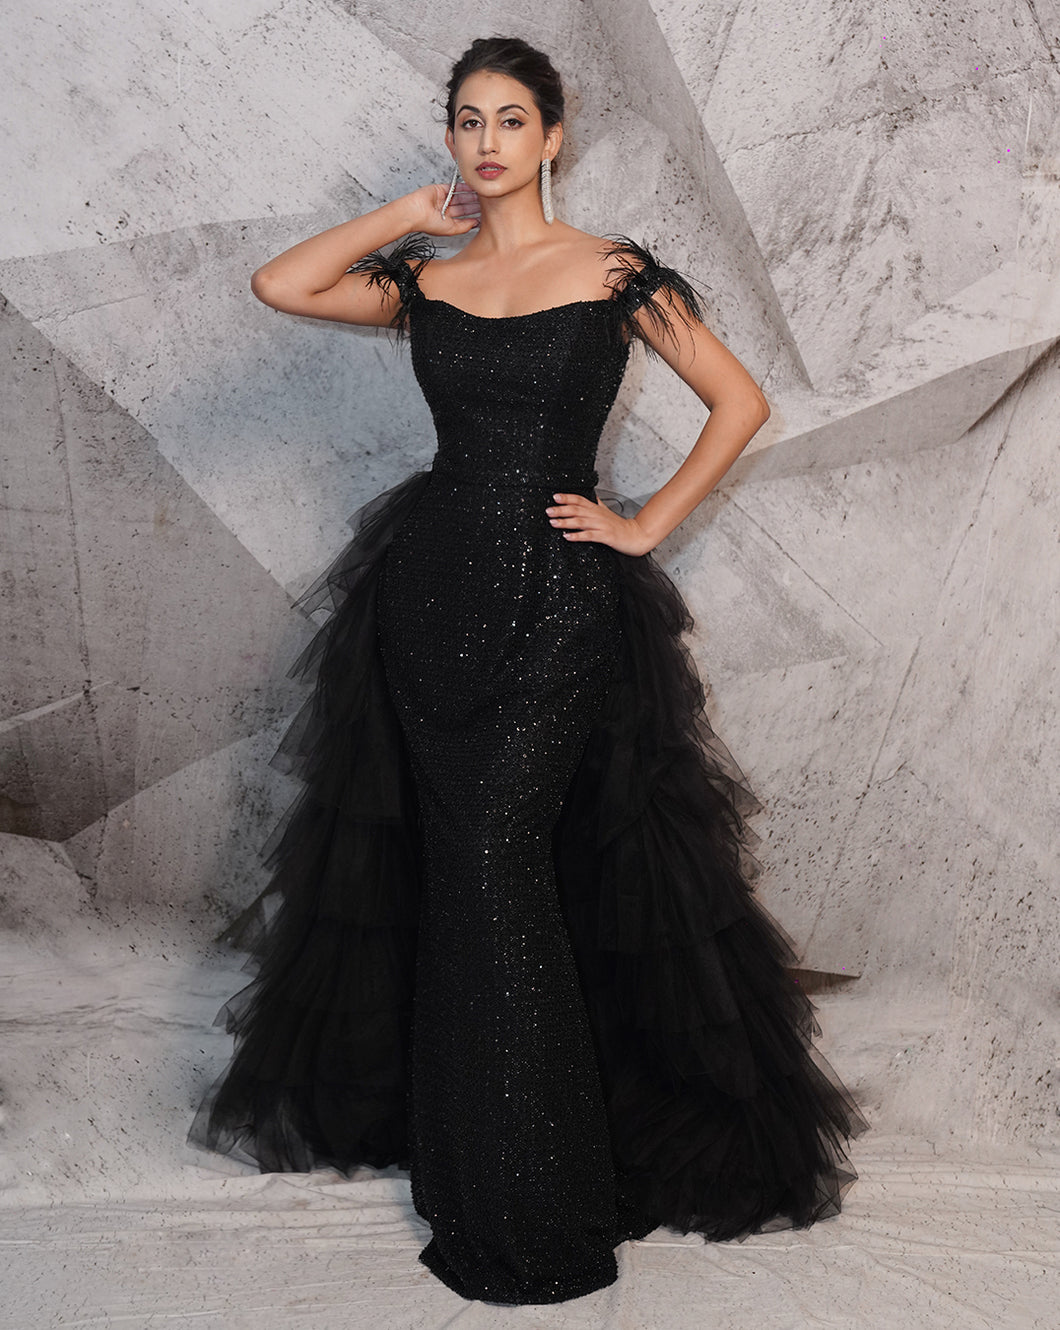 The Beaded Black Gown